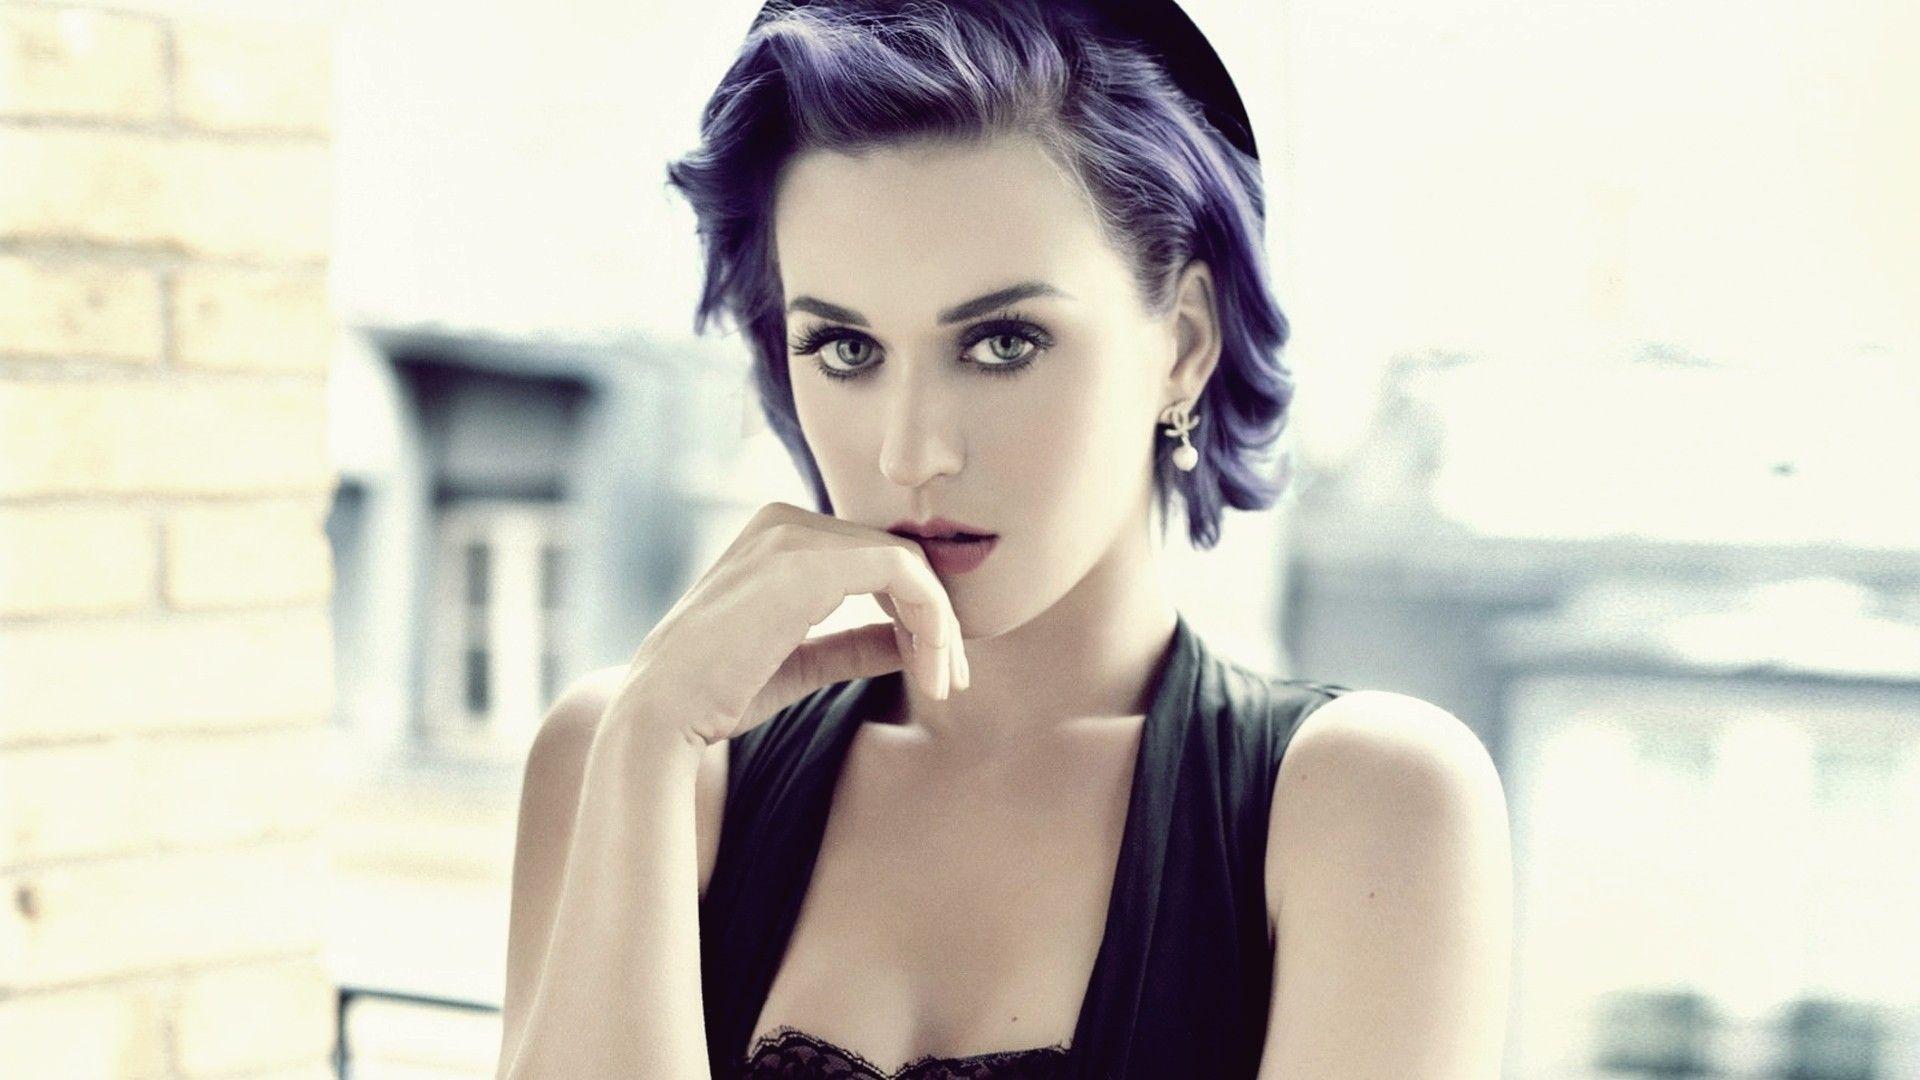 Katy Perry Wallpaper 1080p Wallpaper Download Logo And Photo Cookies